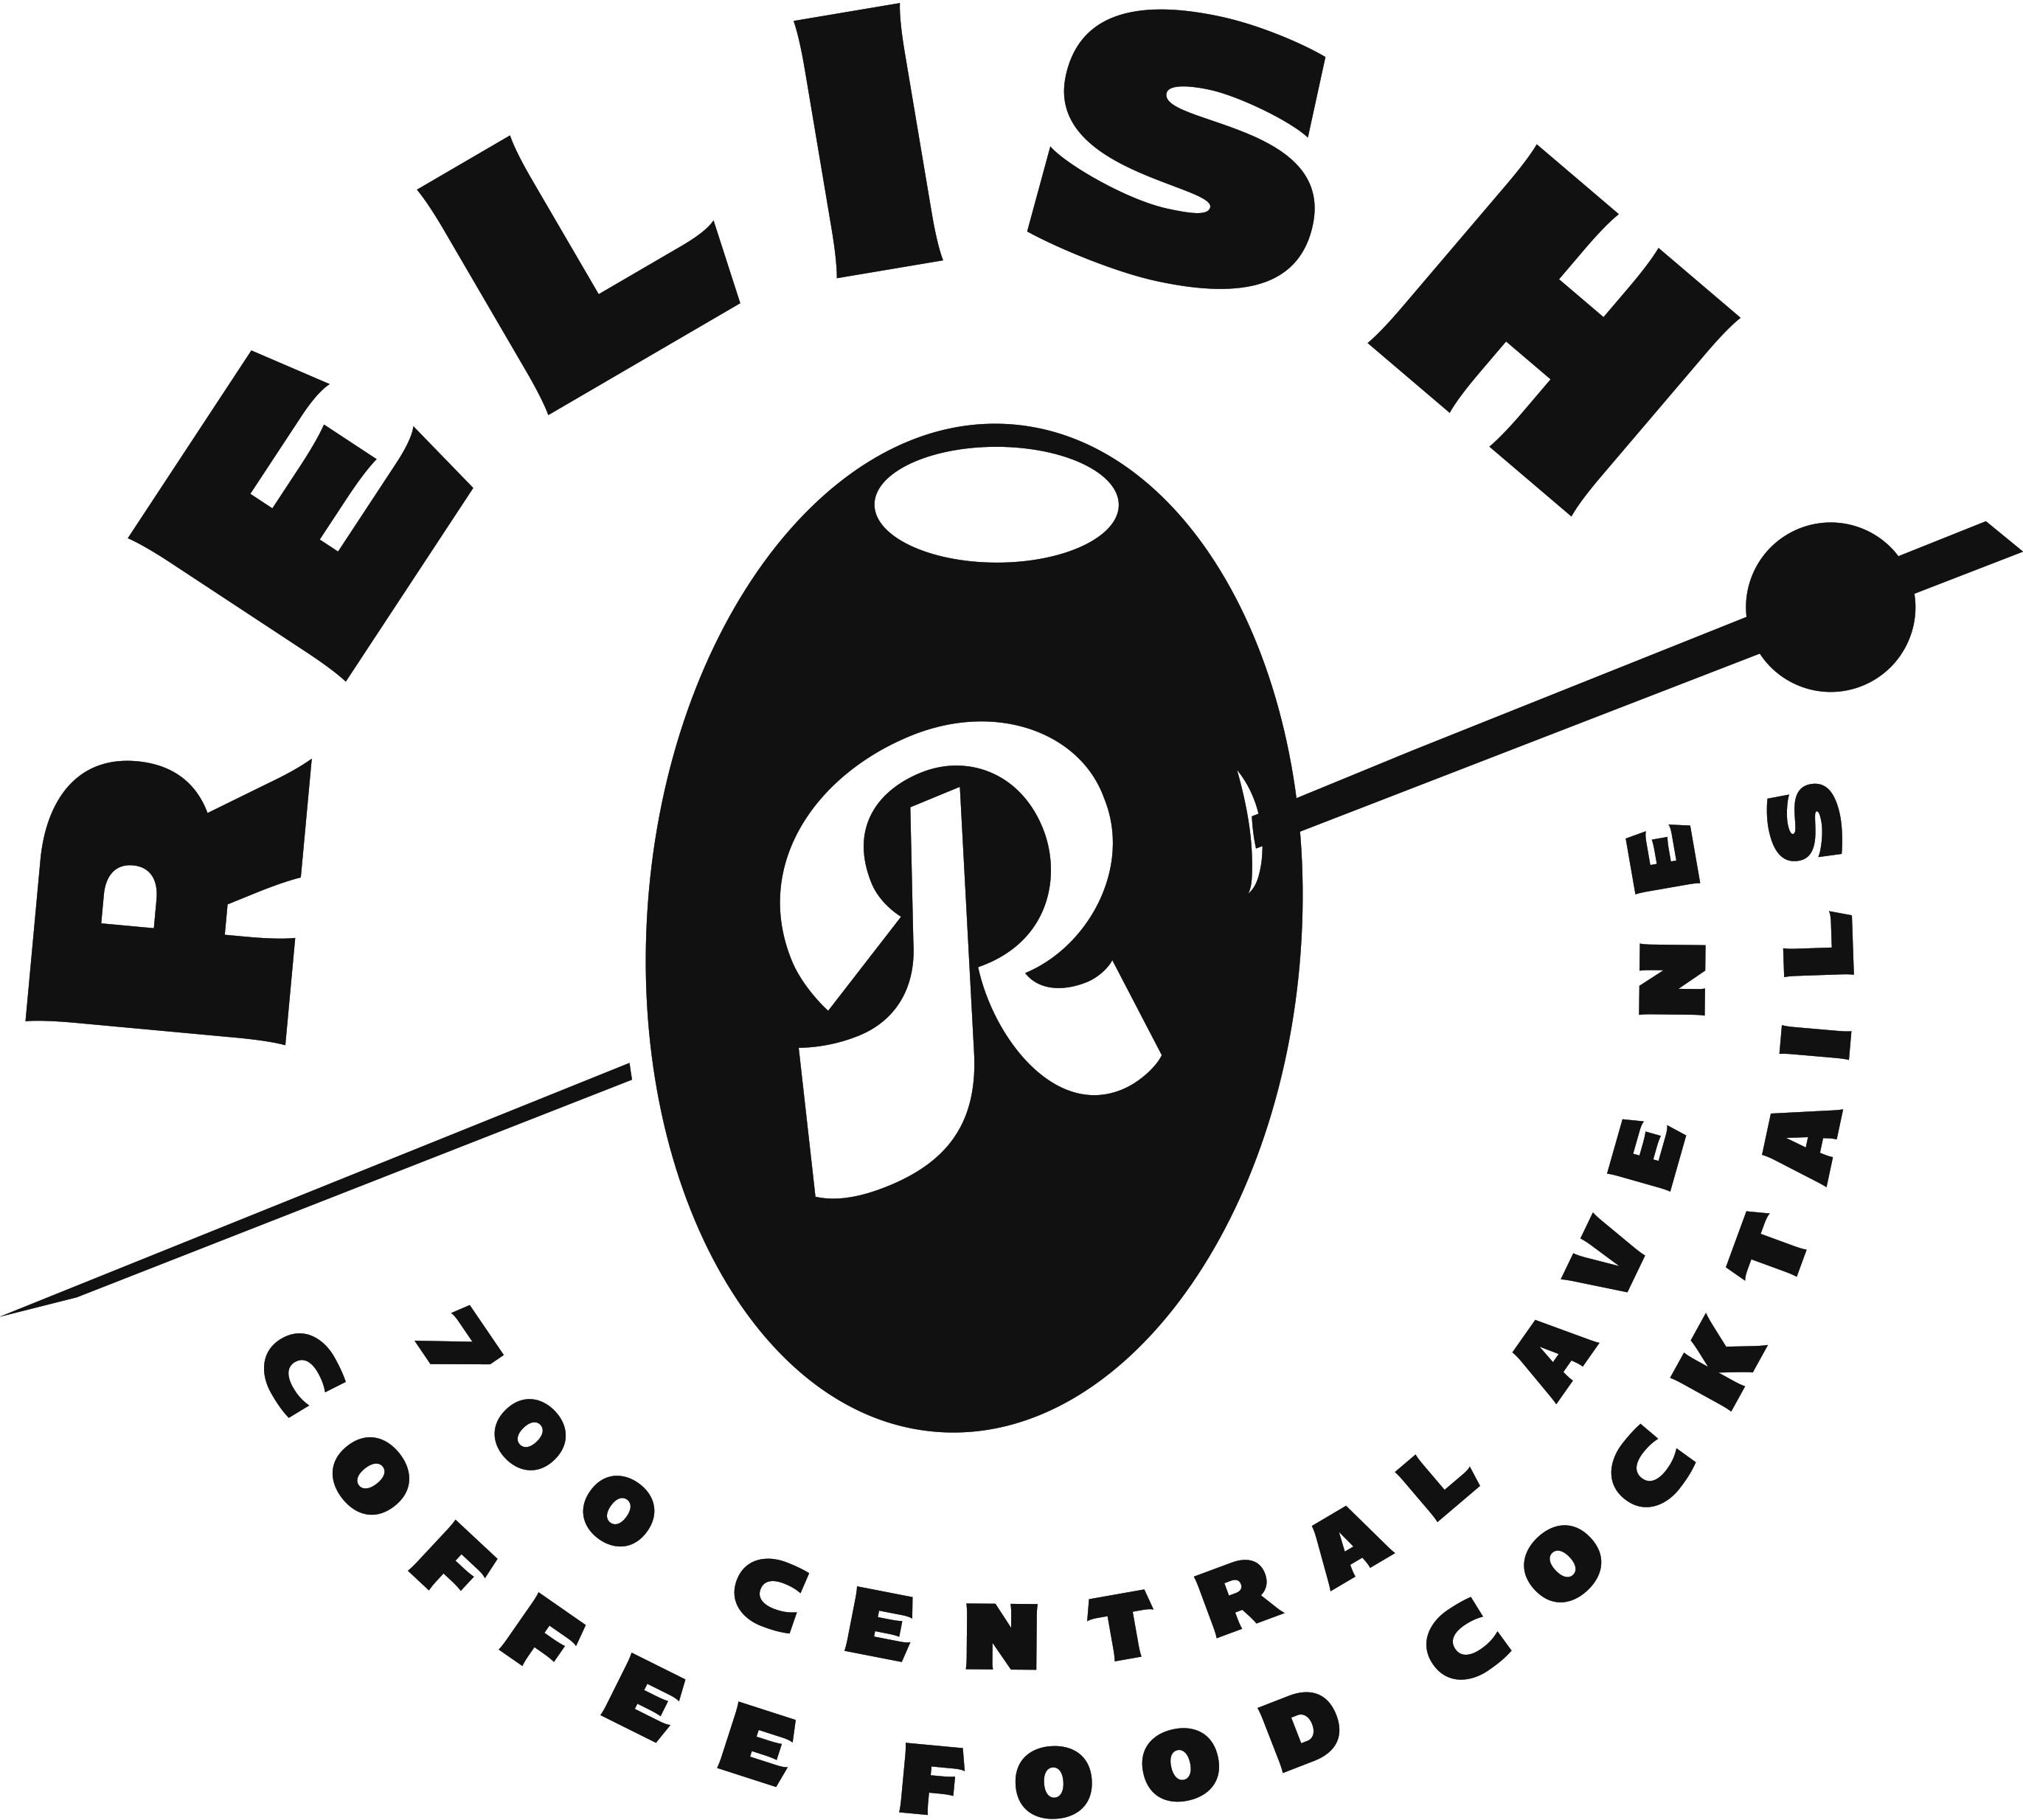 Relish MPLS 700 Central Ave NE